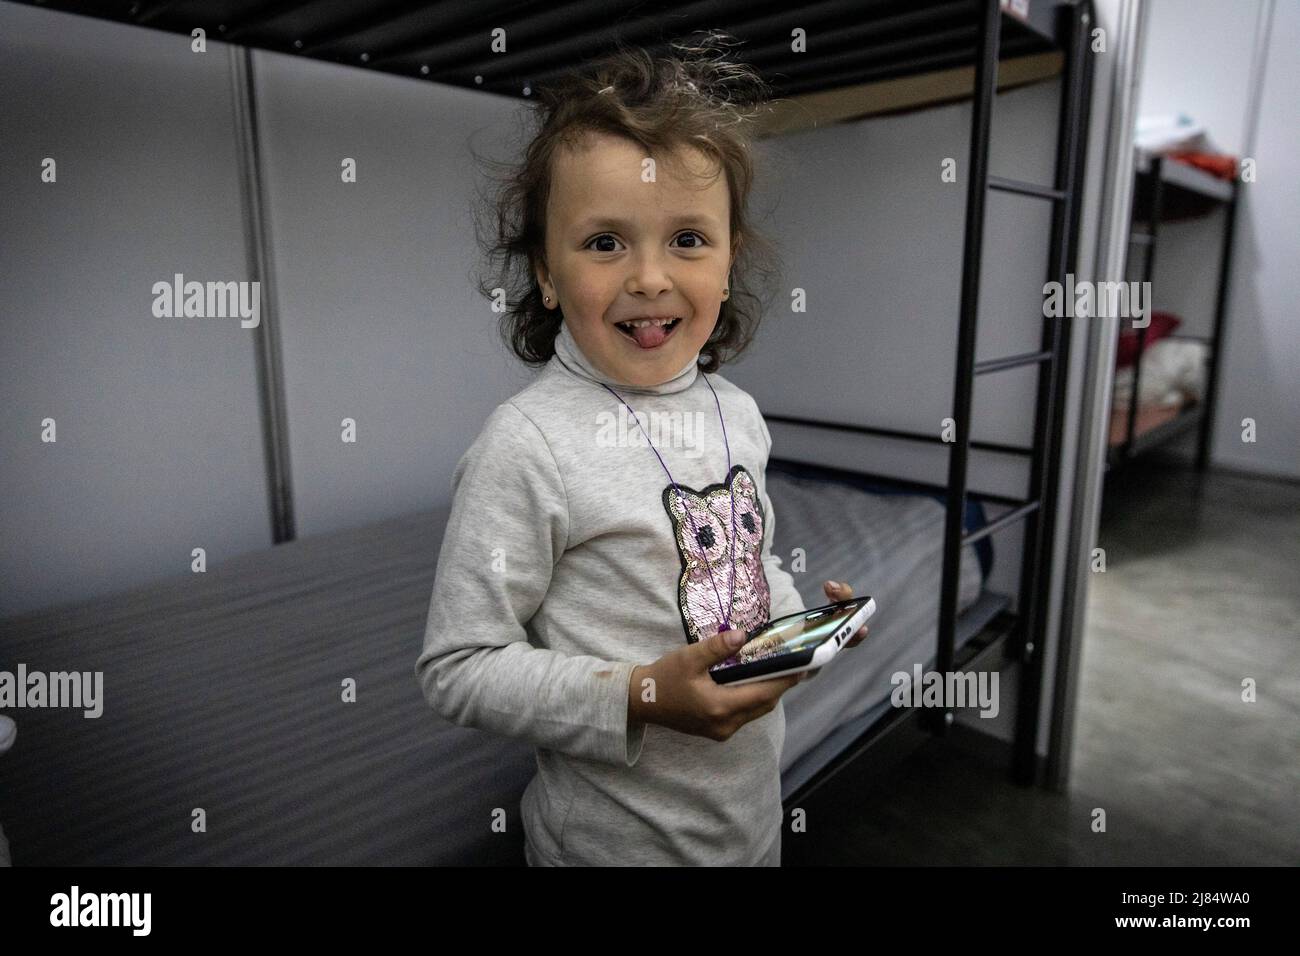 Zaporizhzhia, Ukraine. 11th May, 2022. Sophia plays with a mobile phone at an underground shelter. Temporary refugee shelters have been set up in Zaporizhia, as the city has been constantly receiving refugees fleeing from Russian controlled territories in the country's east and south. According to the United Nations, more than 11 million people are believed to have fled their homes in Ukraine since the conflict began, with 7.7 million people displaced inside their homeland. (Photo by Alex Chan Tsz Yuk/SOPA Images/Sipa USA) Credit: Sipa USA/Alamy Live News Stock Photo